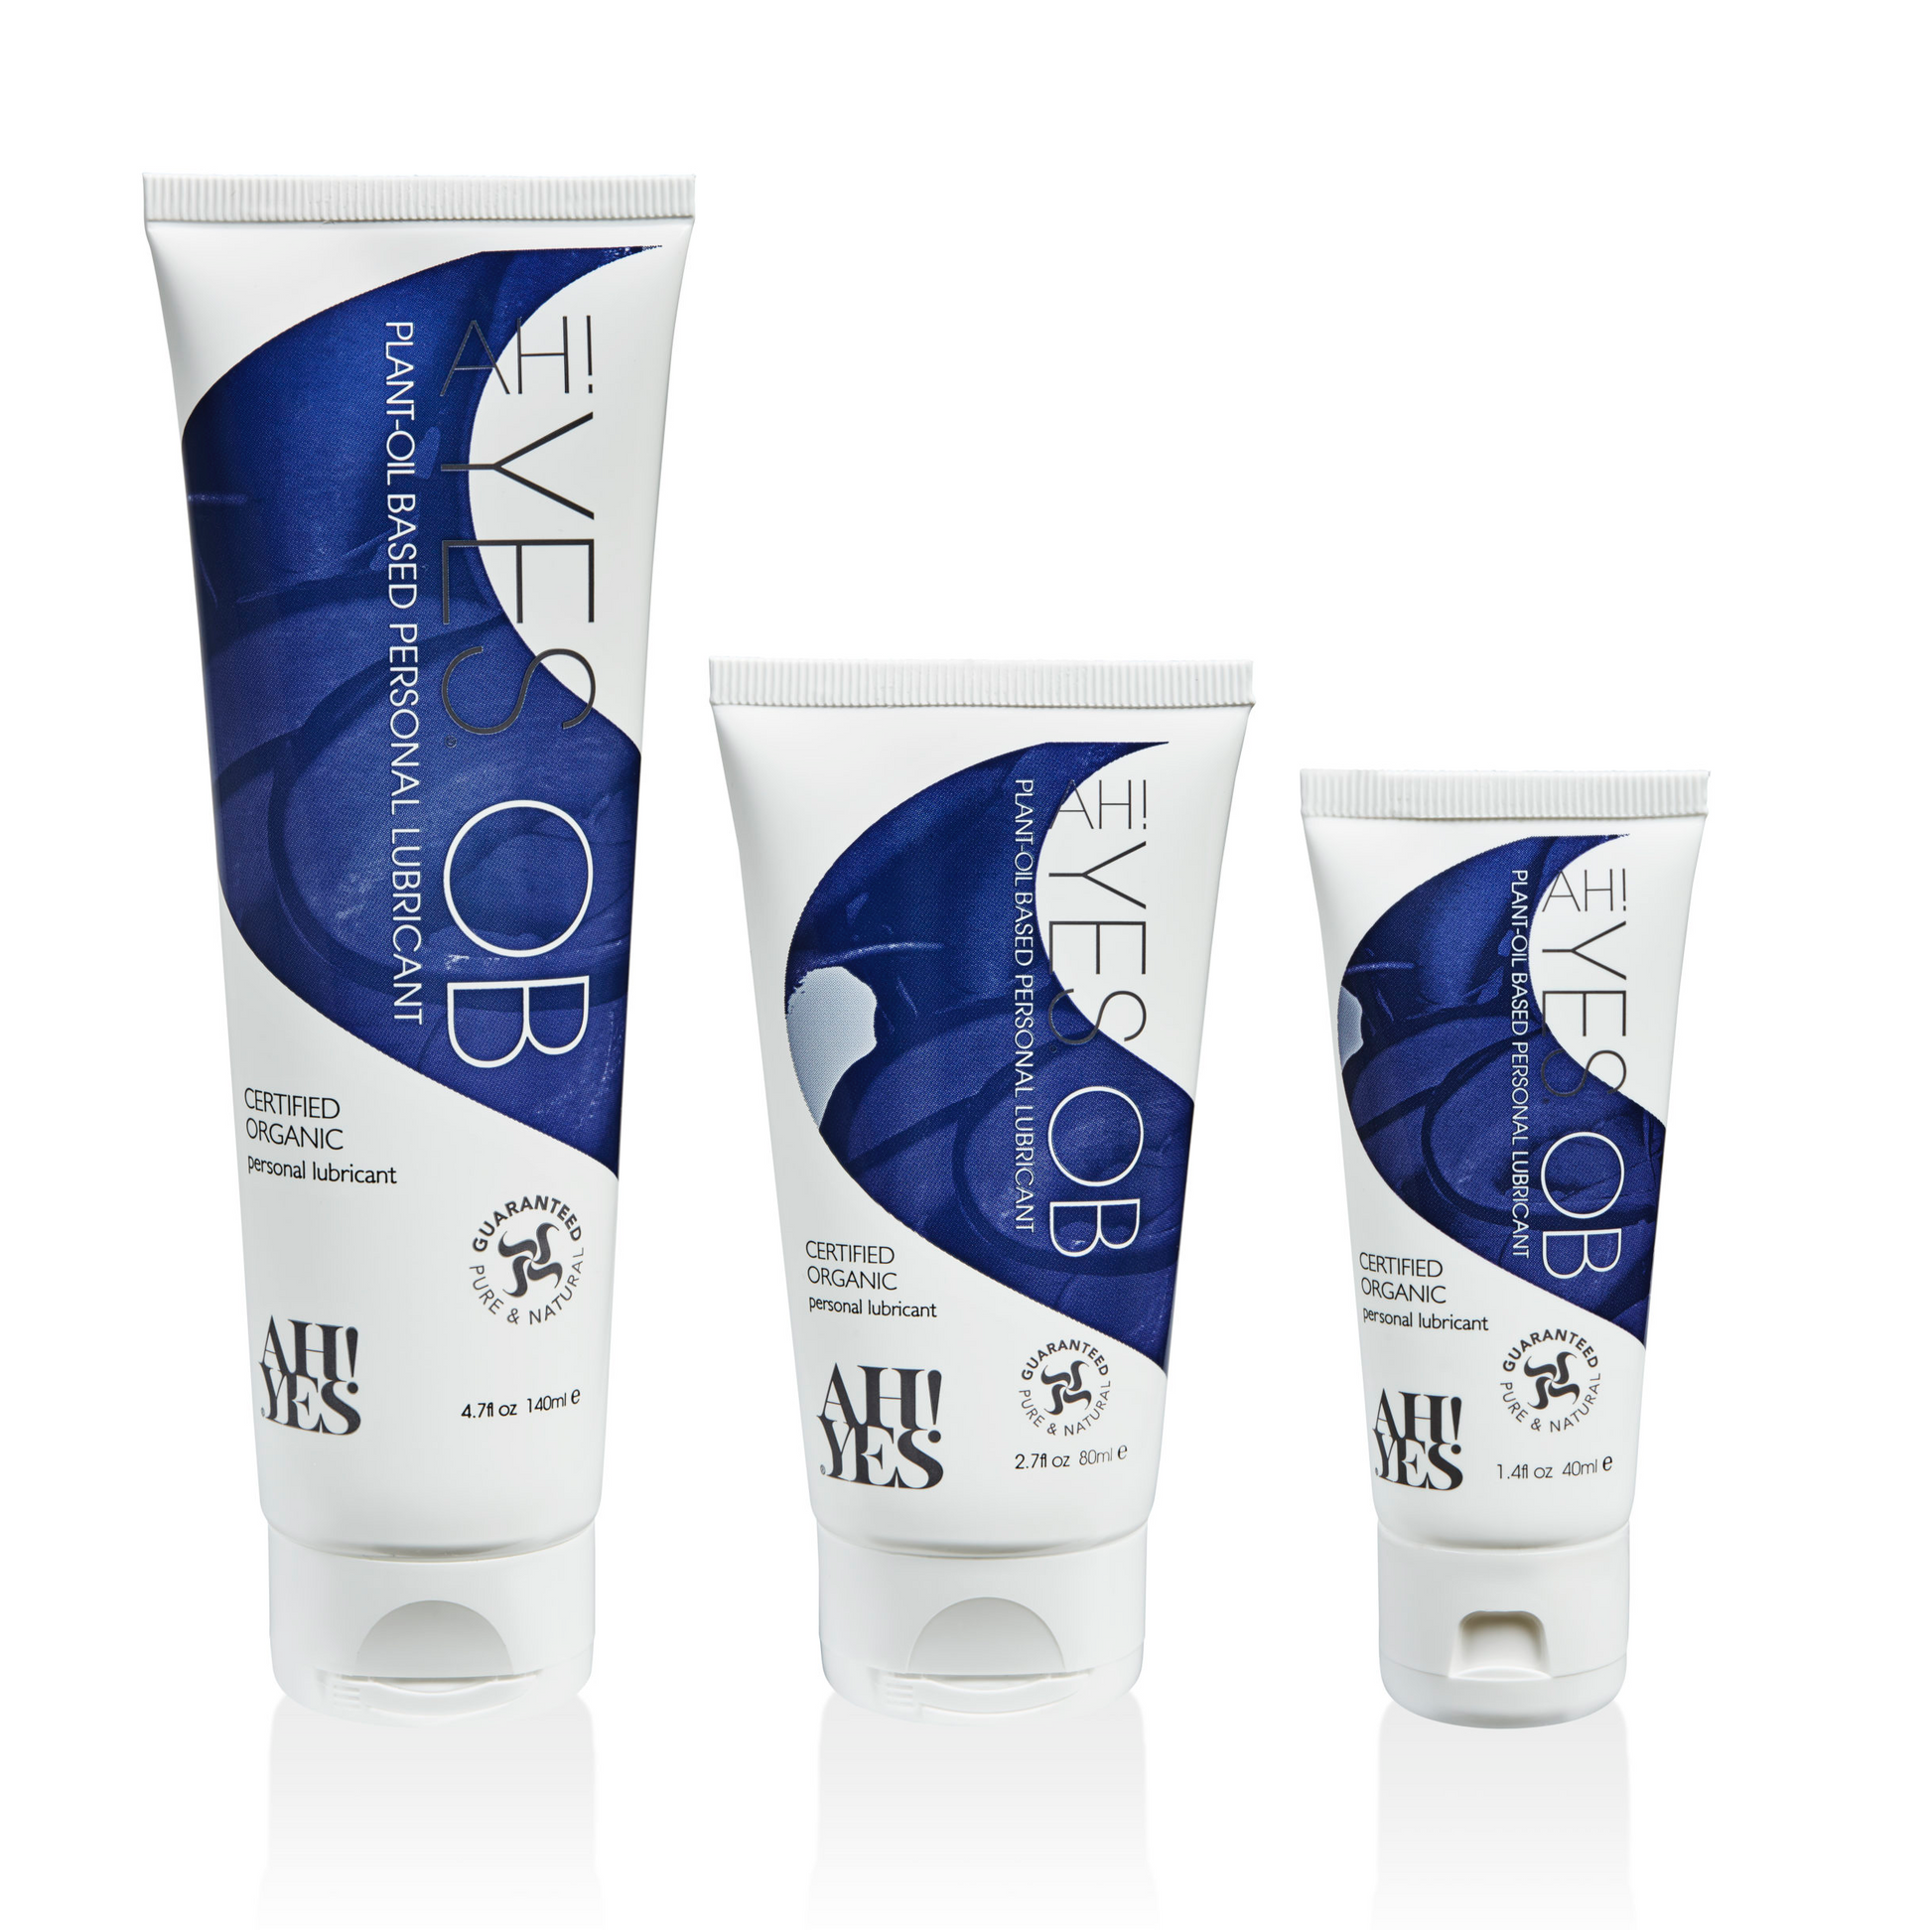 AH_YES OB Plant-Oil Based Personal Lubricant MADE SAFE